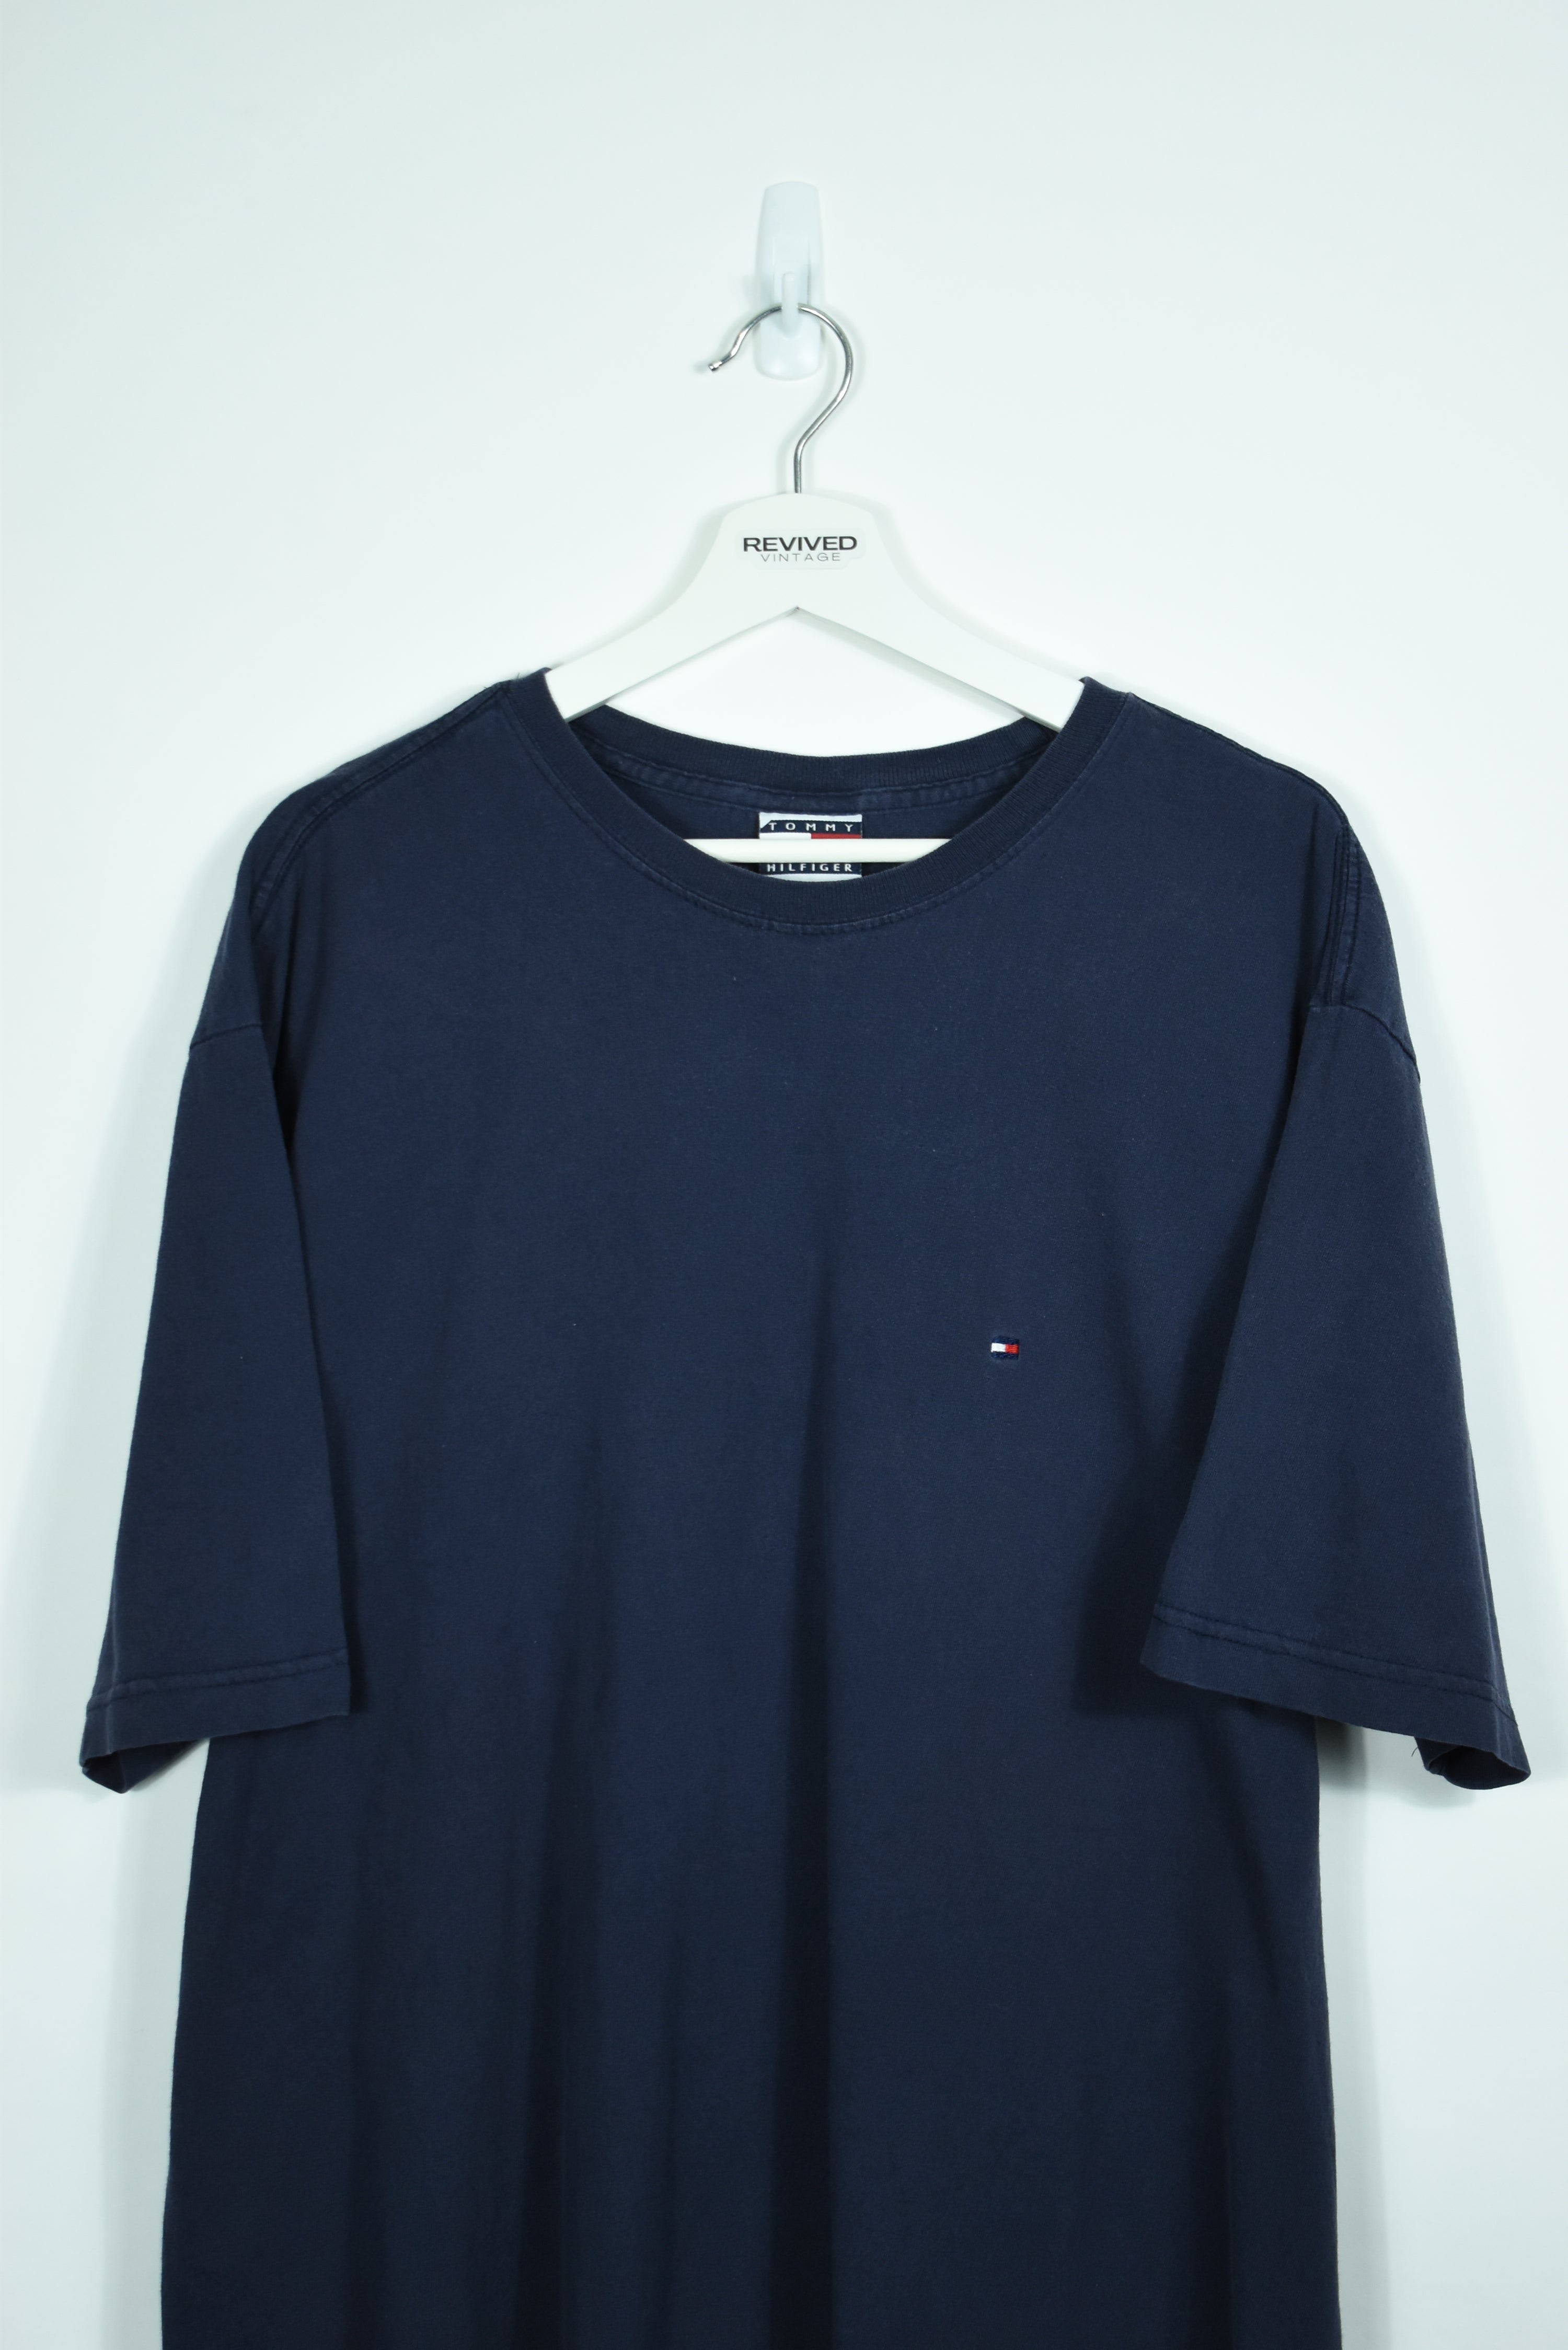 Vintage Tommy Hilfiger Embroidery Small Logo T Shirt XLARGE